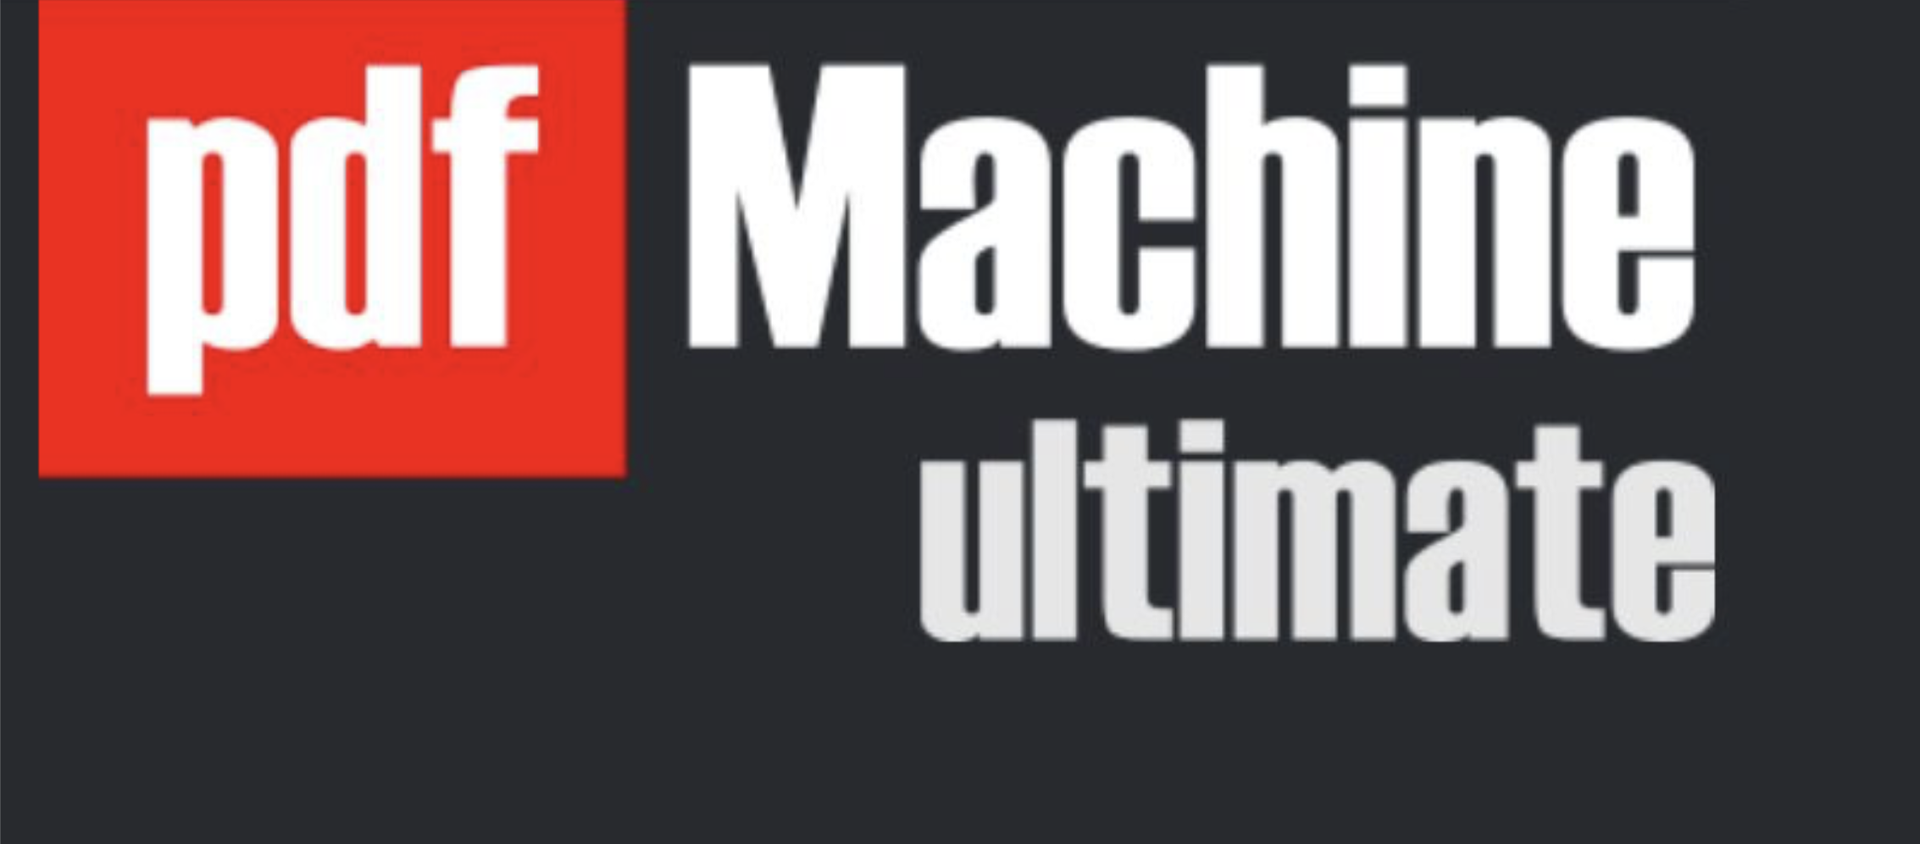 Does pdfMachine work on Mac or Linux operating systems